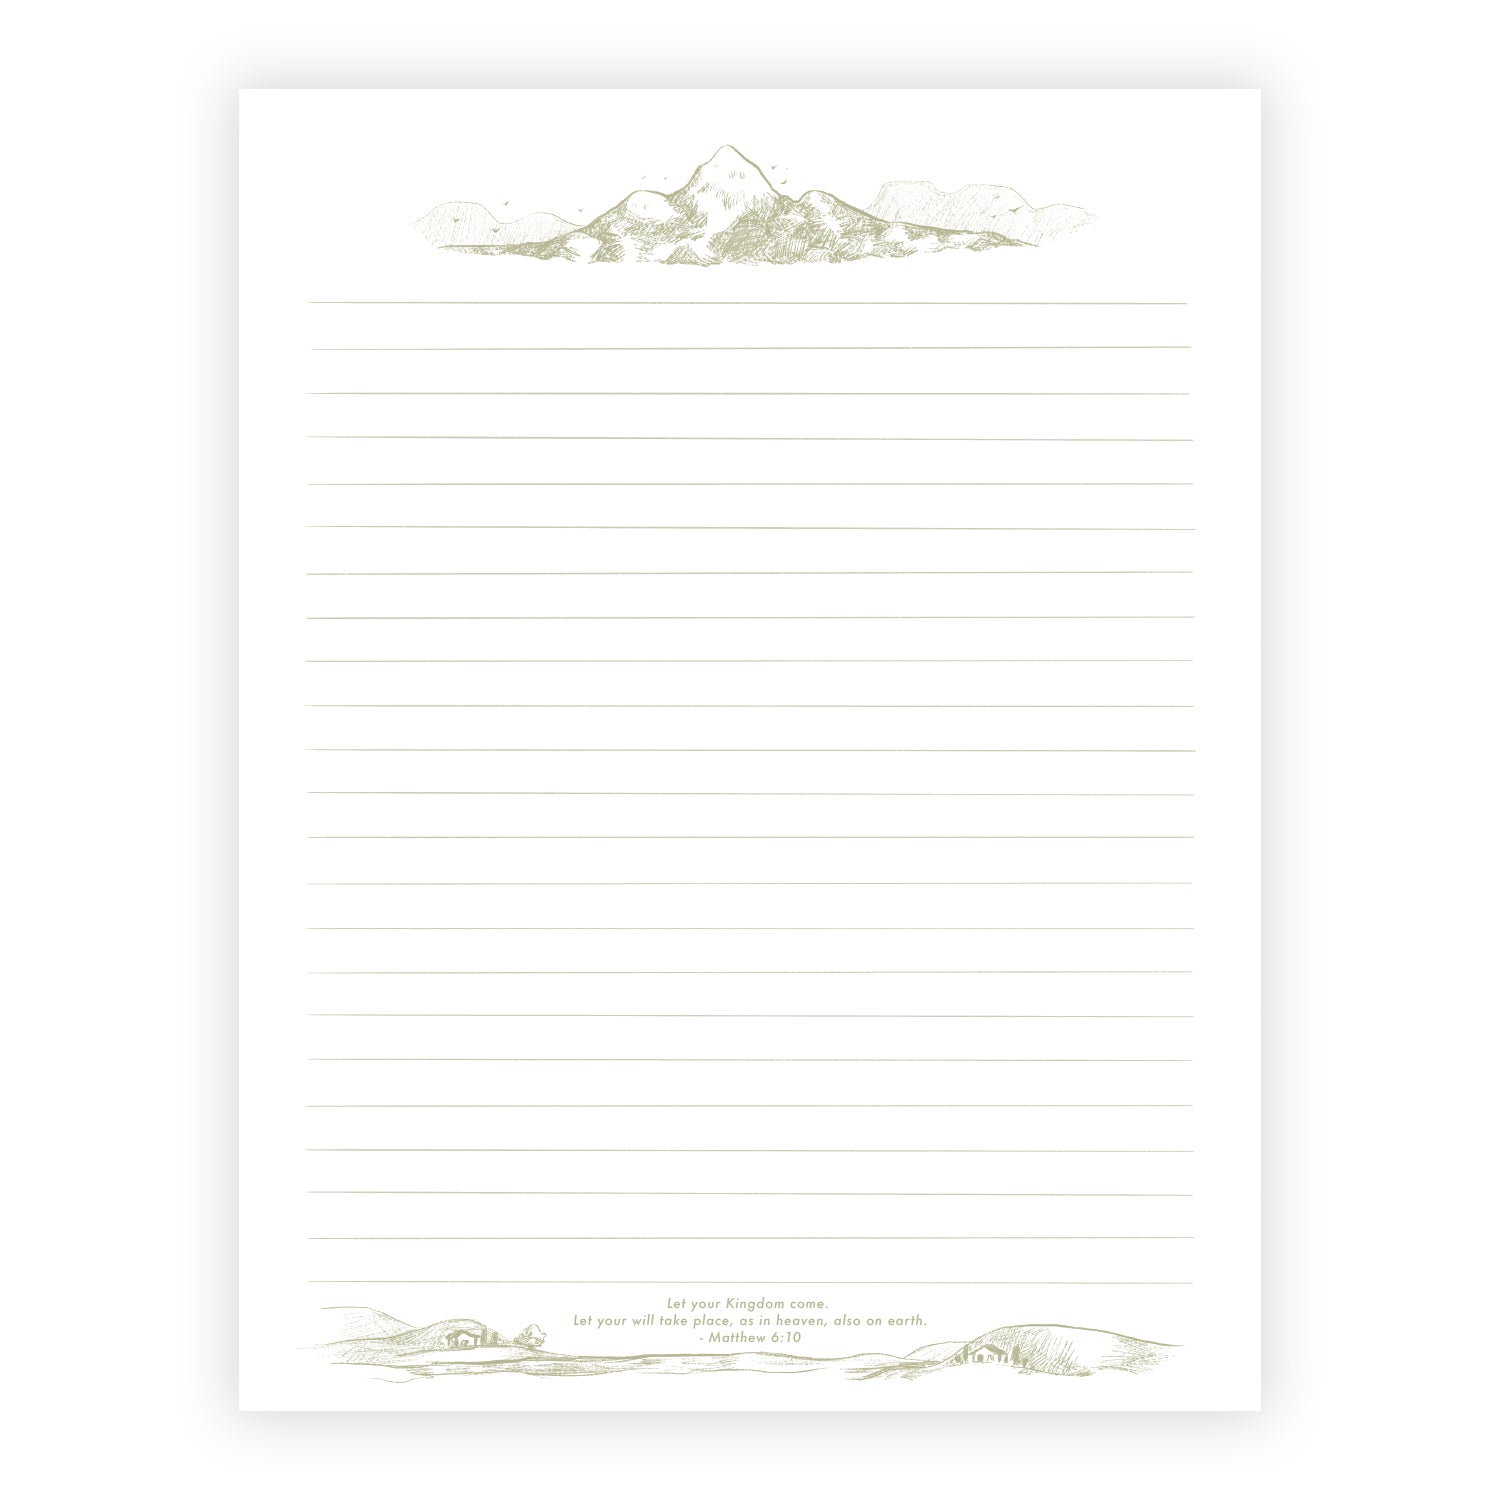 Printable Letter Writing Sheets - Mountain - Let your Kingdom Come - Matthew 6:10